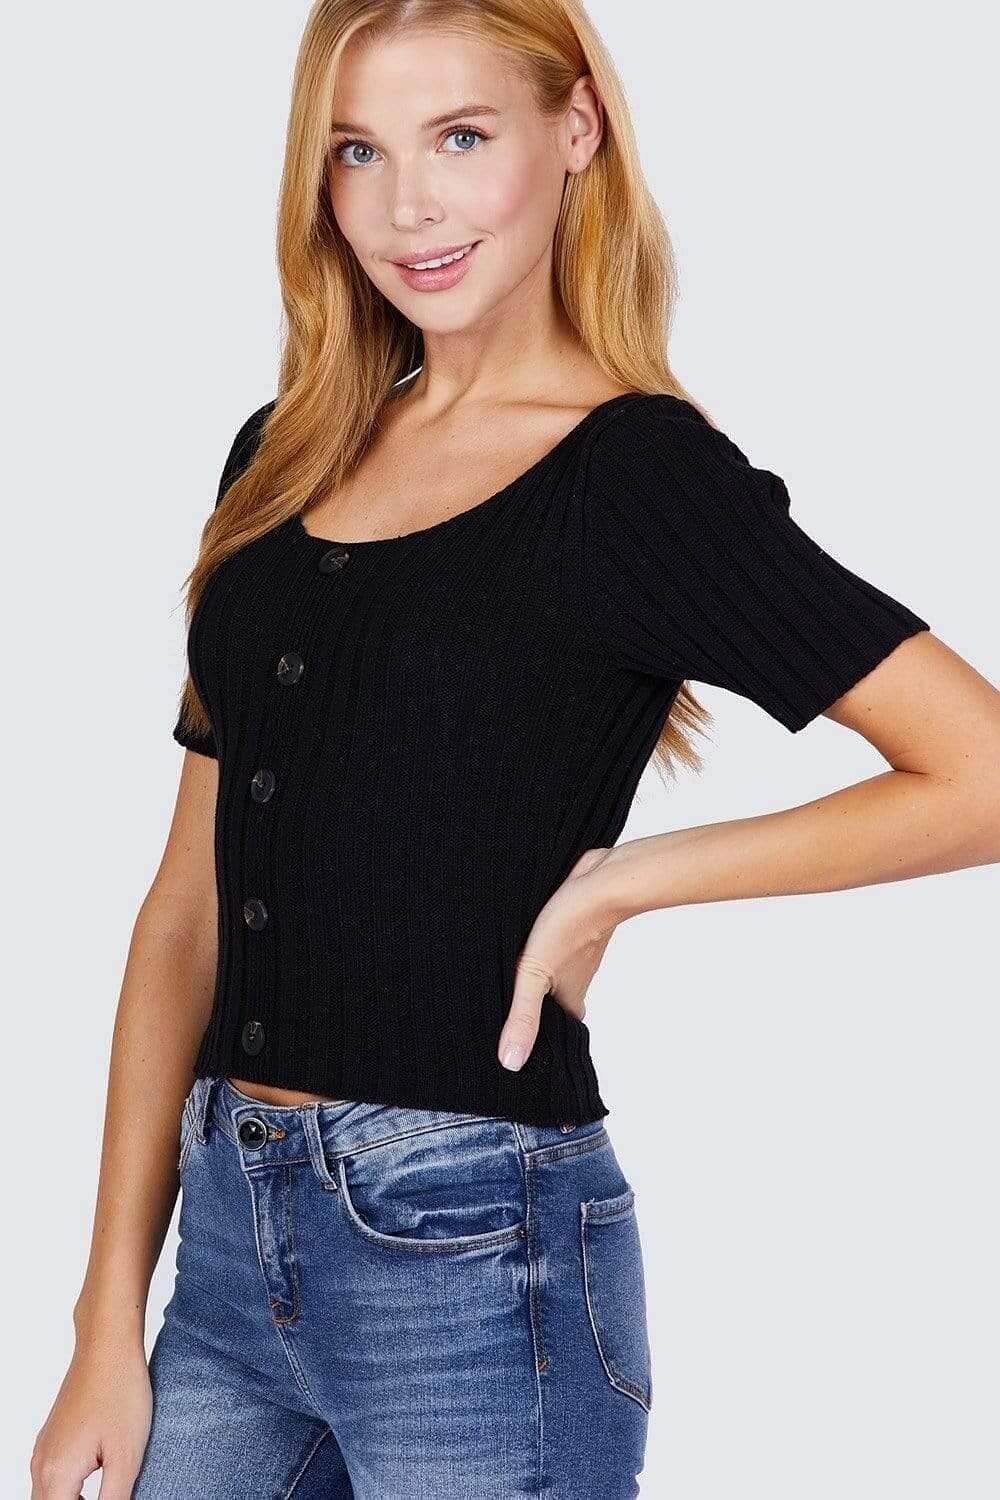 Black Short Sleeve Rib Knitted Sweater - Shopping Therapy, LLC Top